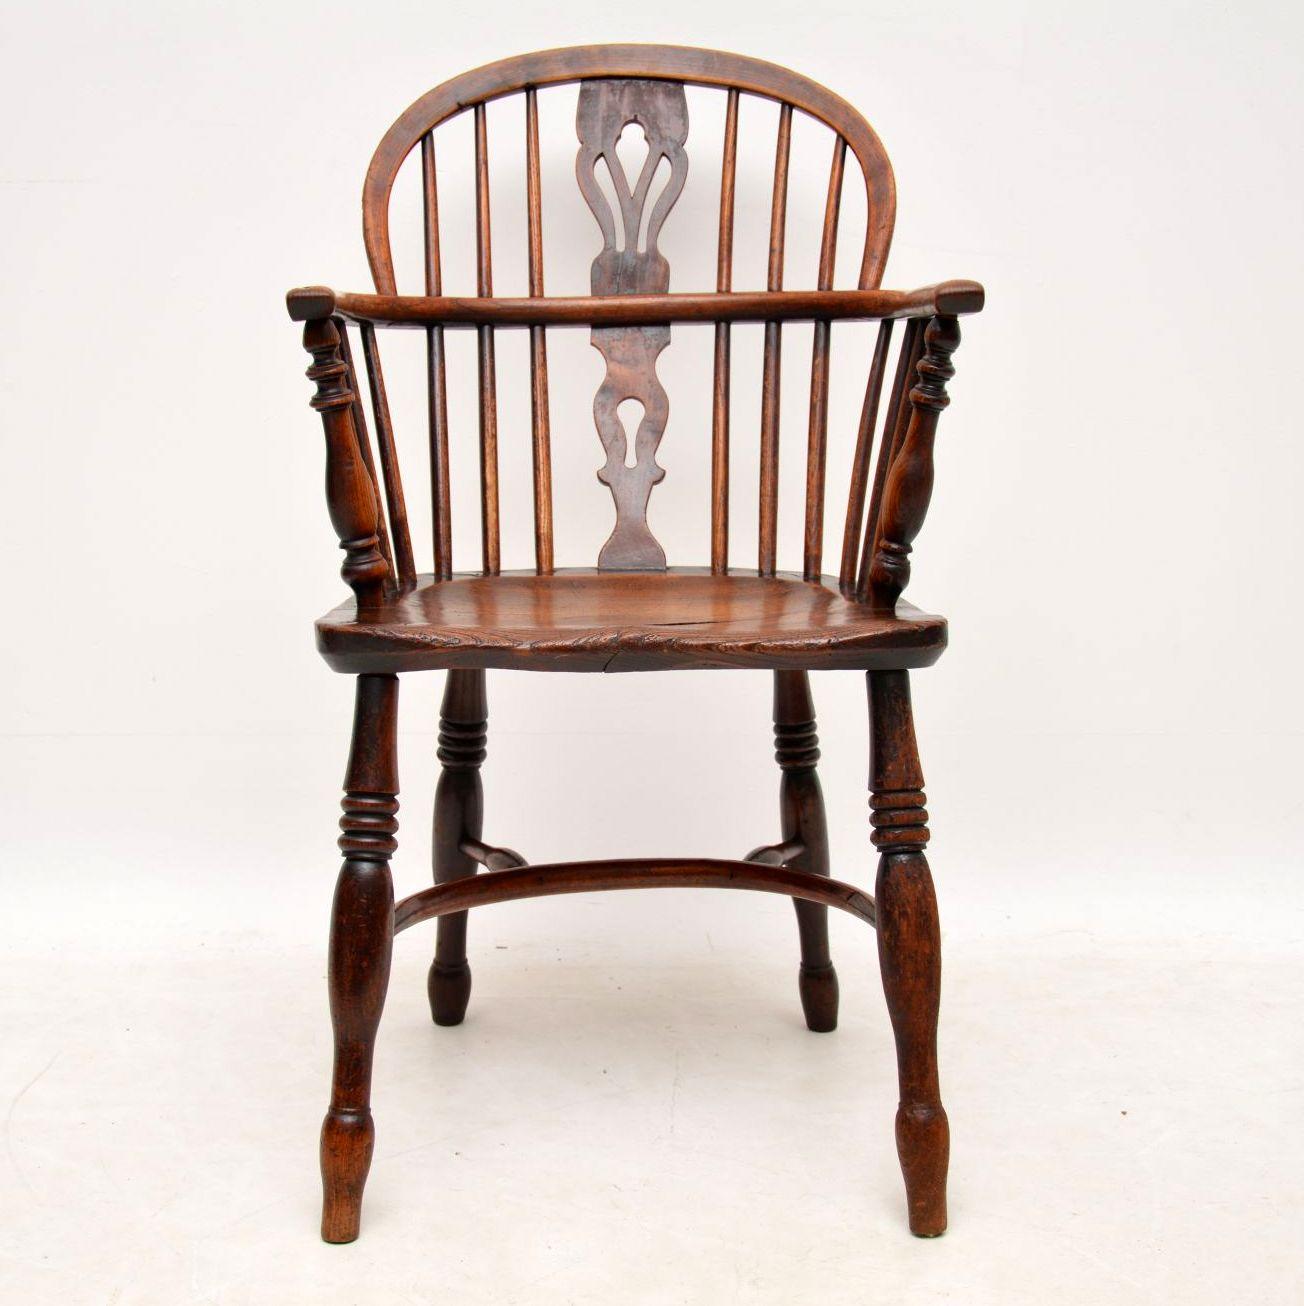 This antique Elm Windsor Armchair does have a lot of age & is in good original condition. As you can see from the images, it does have usage marks, indentations, etc. However, that's all part of the charm & character of this piece. It's beautifully